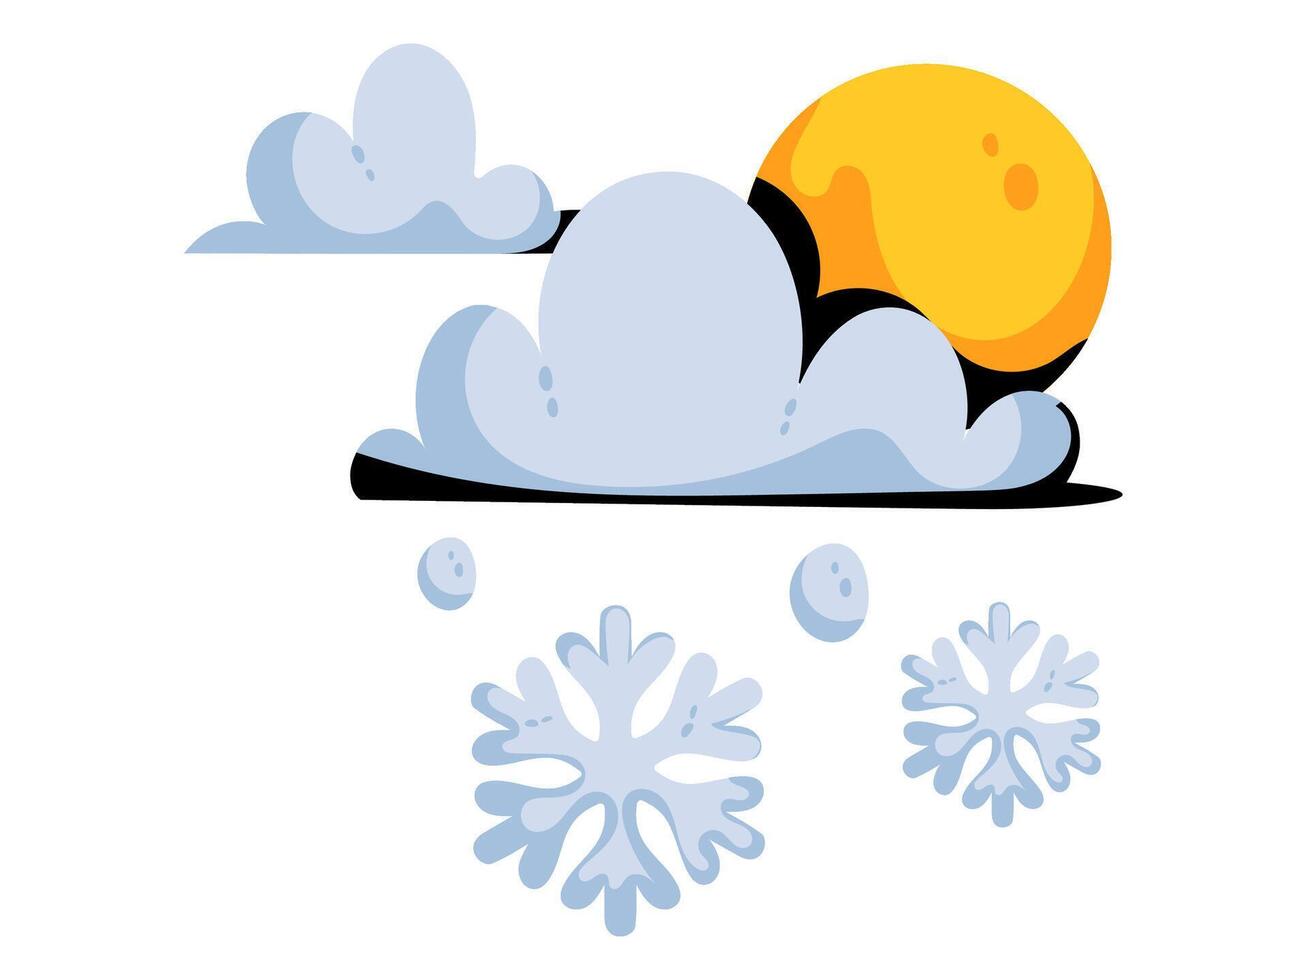 weather element season design with modern illustration climate concept style for atmospheric condition vector